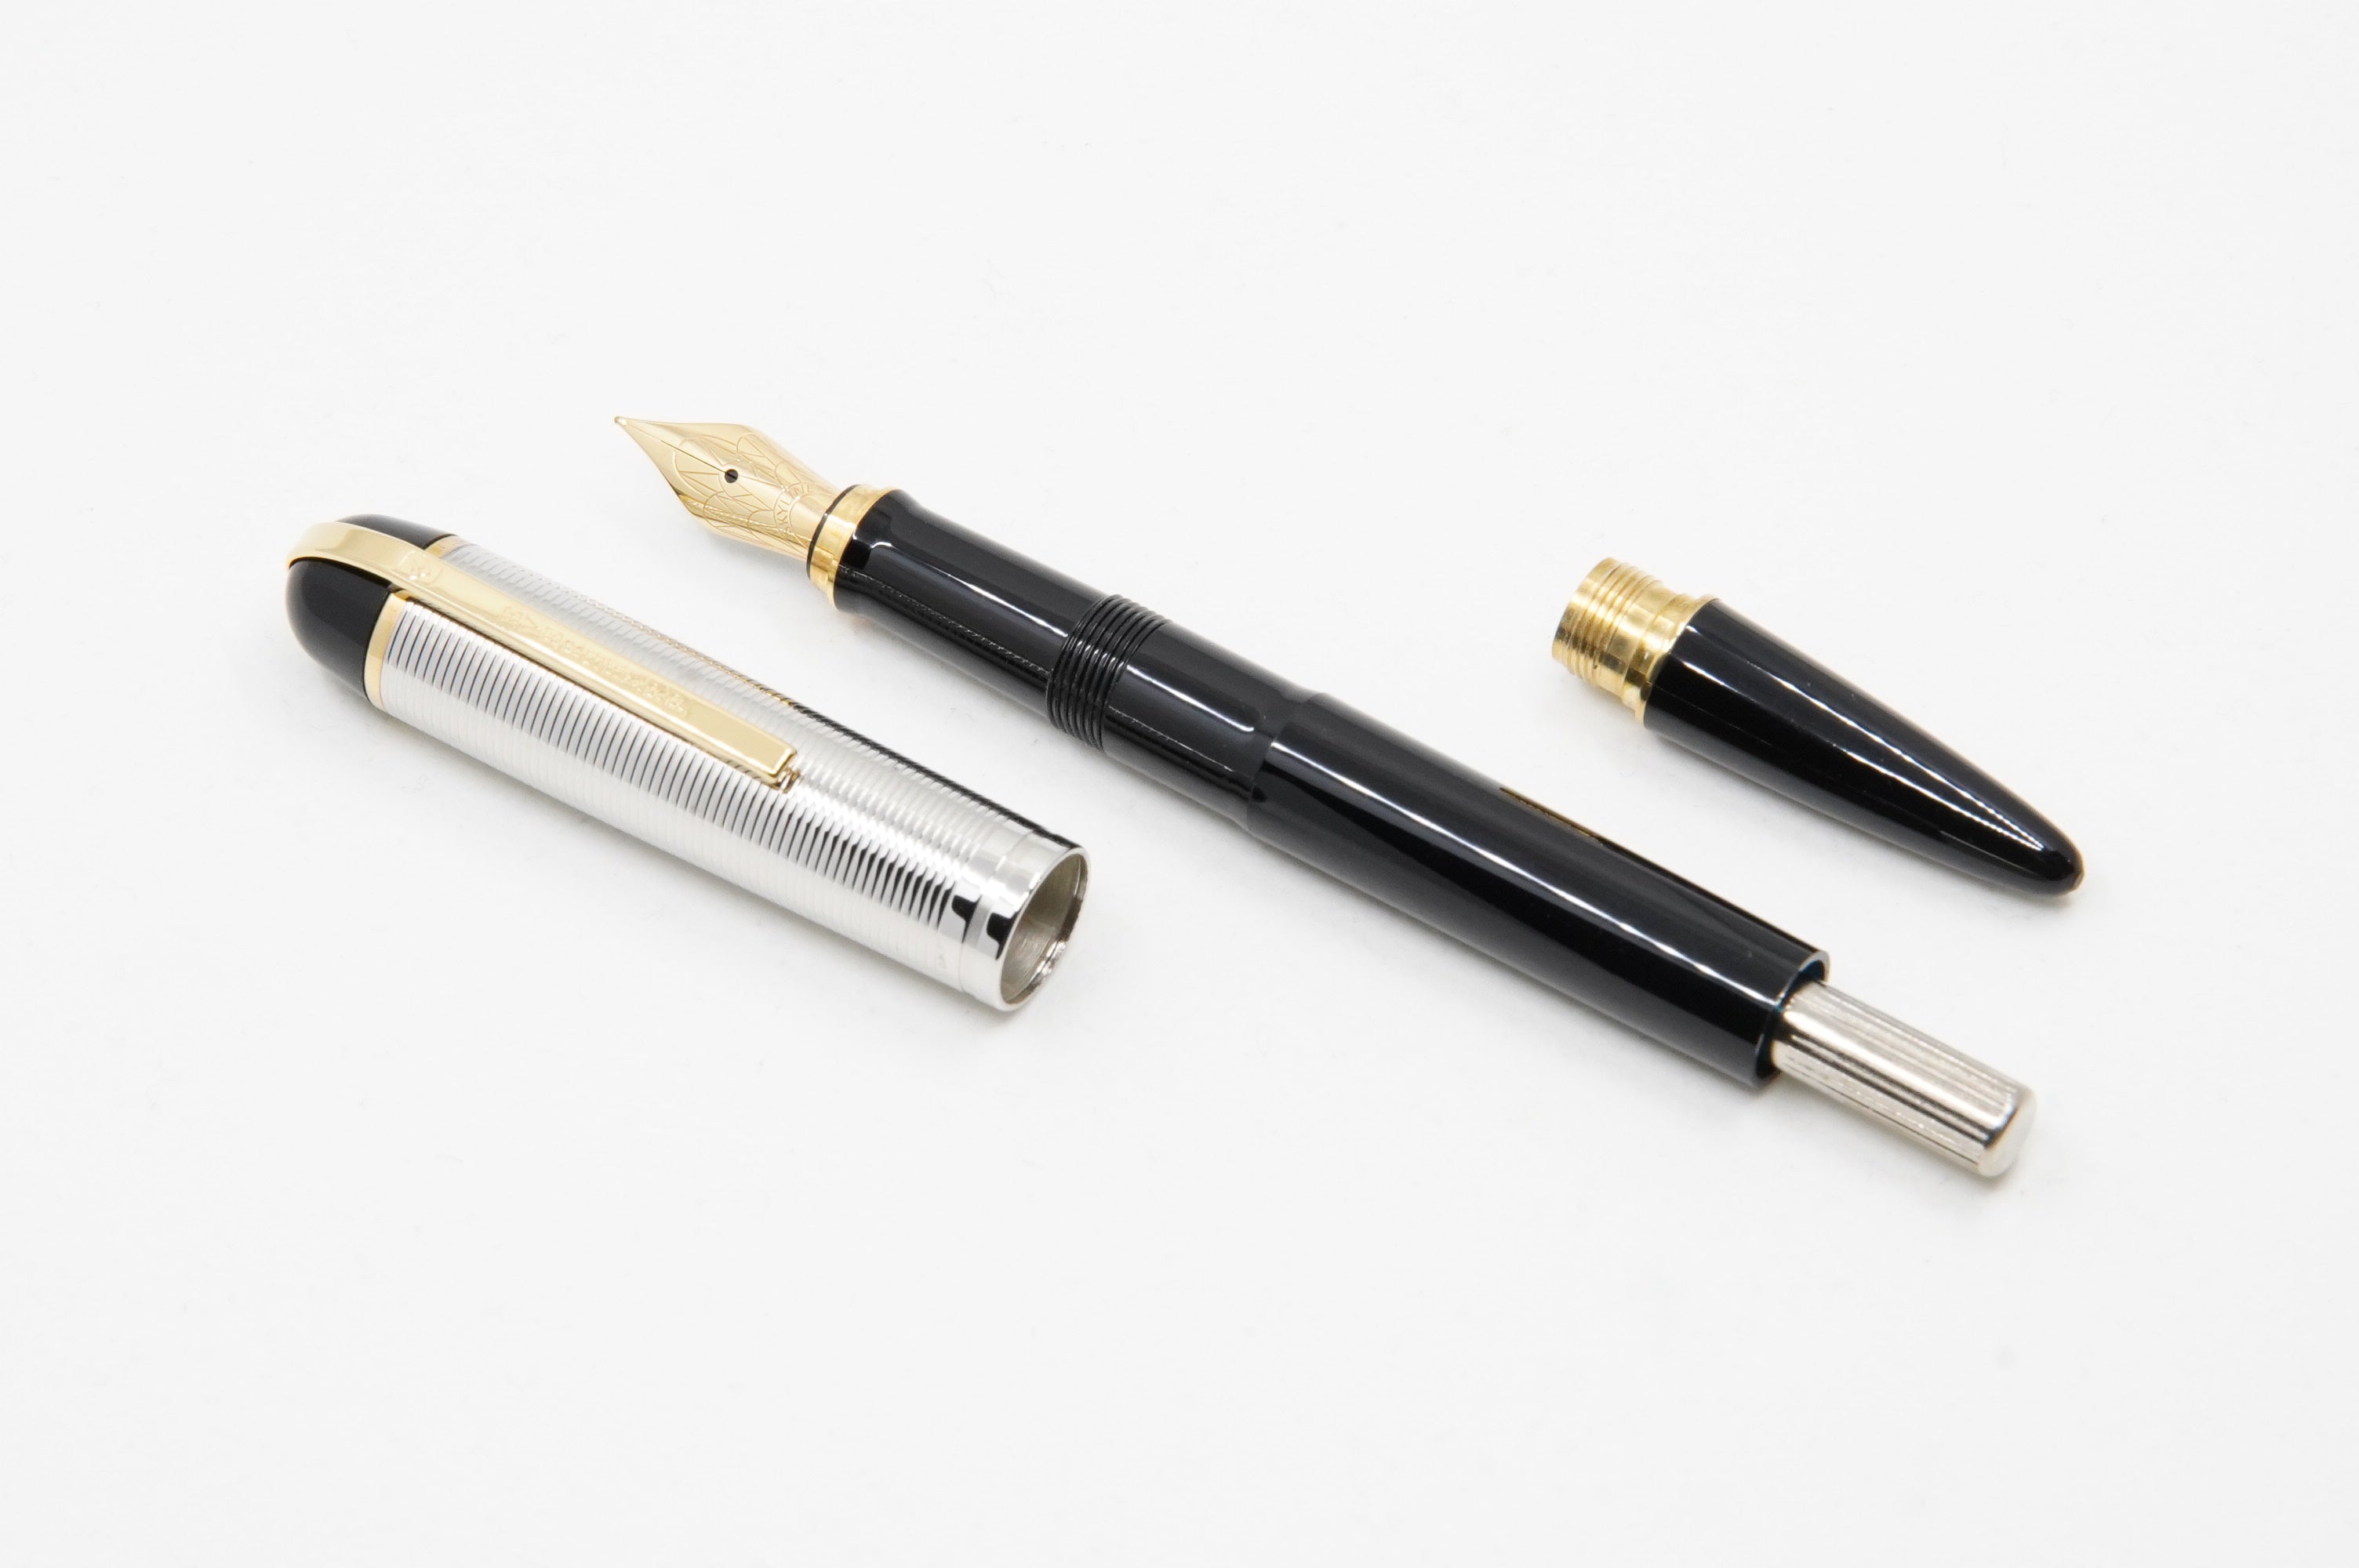 Wahl Eversharp Skyline FP Black - The iconic SKYLINE created by Henry Dreyfus in 1939